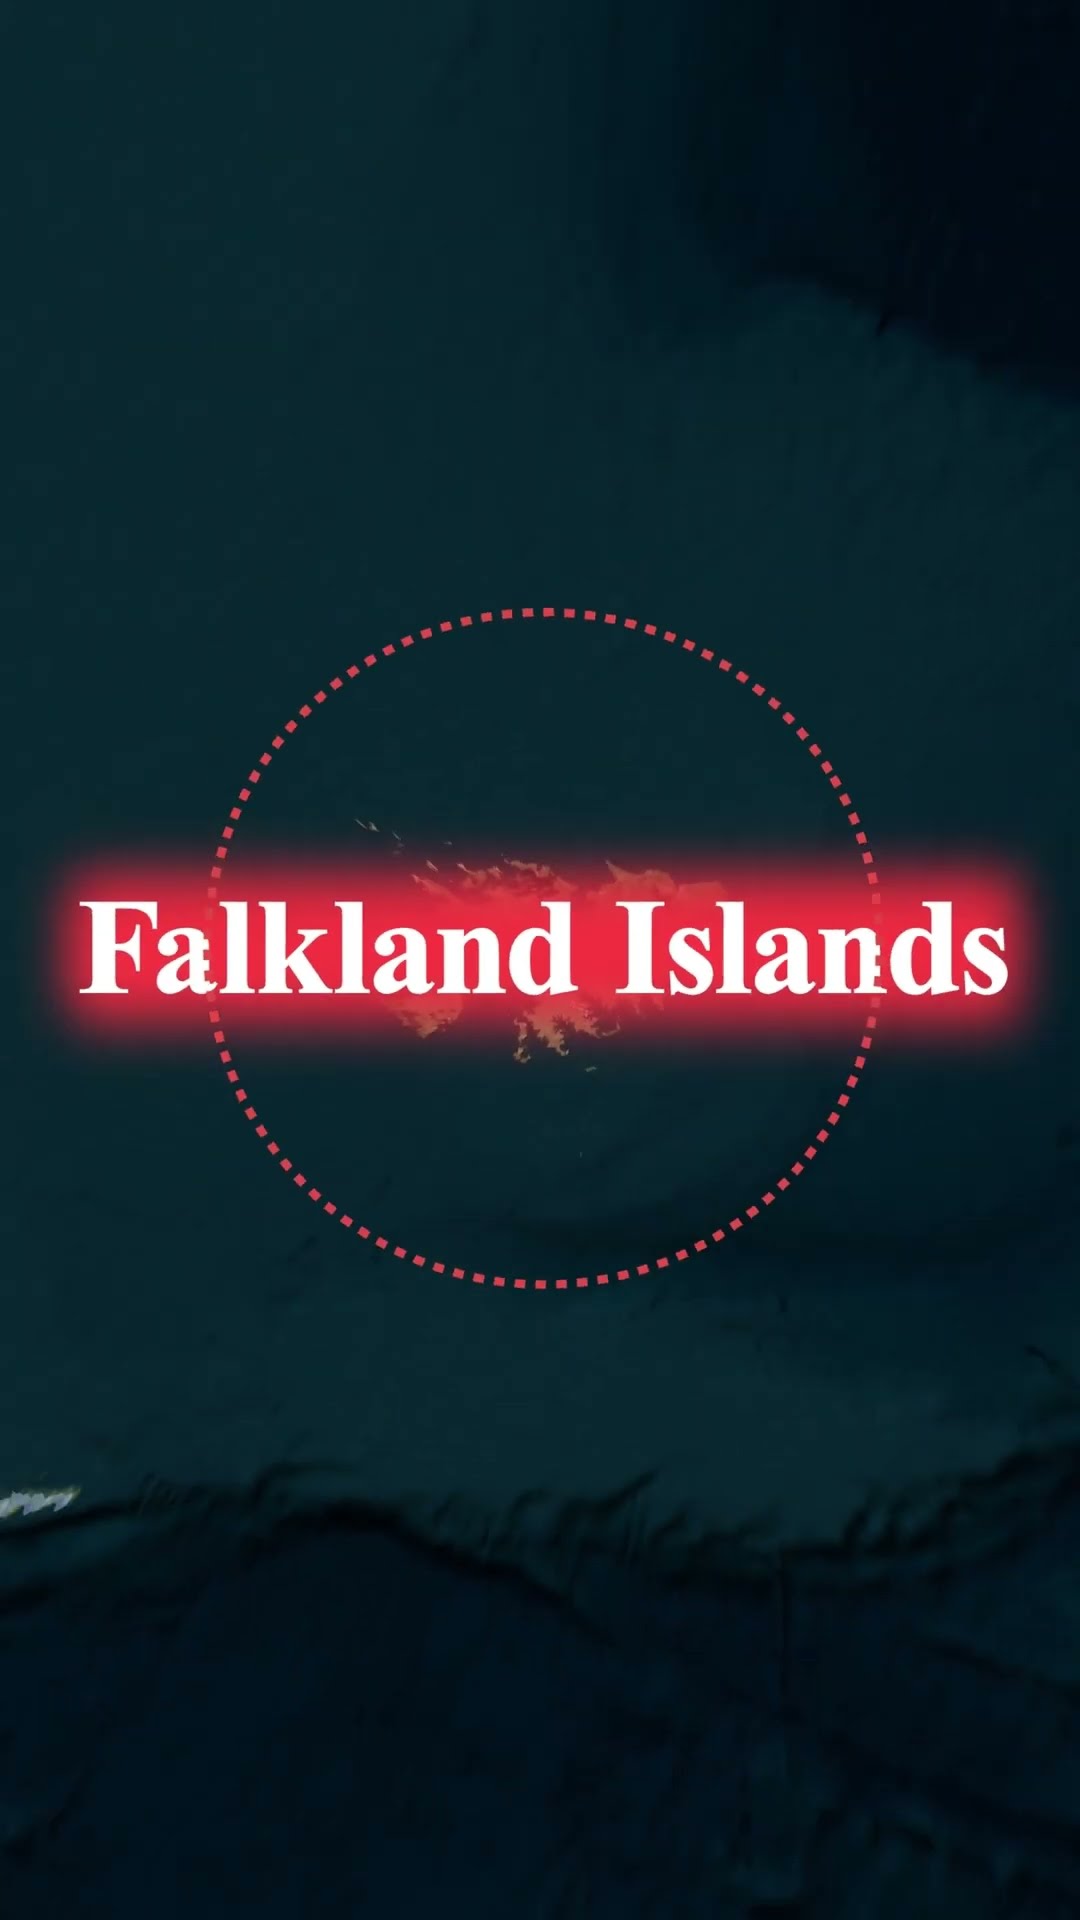 WHY DİD ARGENTİNA ATTACK THE FALKLAND ISLANDS? #SHORTS #HİSTORY #GEOPOLİTİCS #COUNTRİESOFTHEWORLD